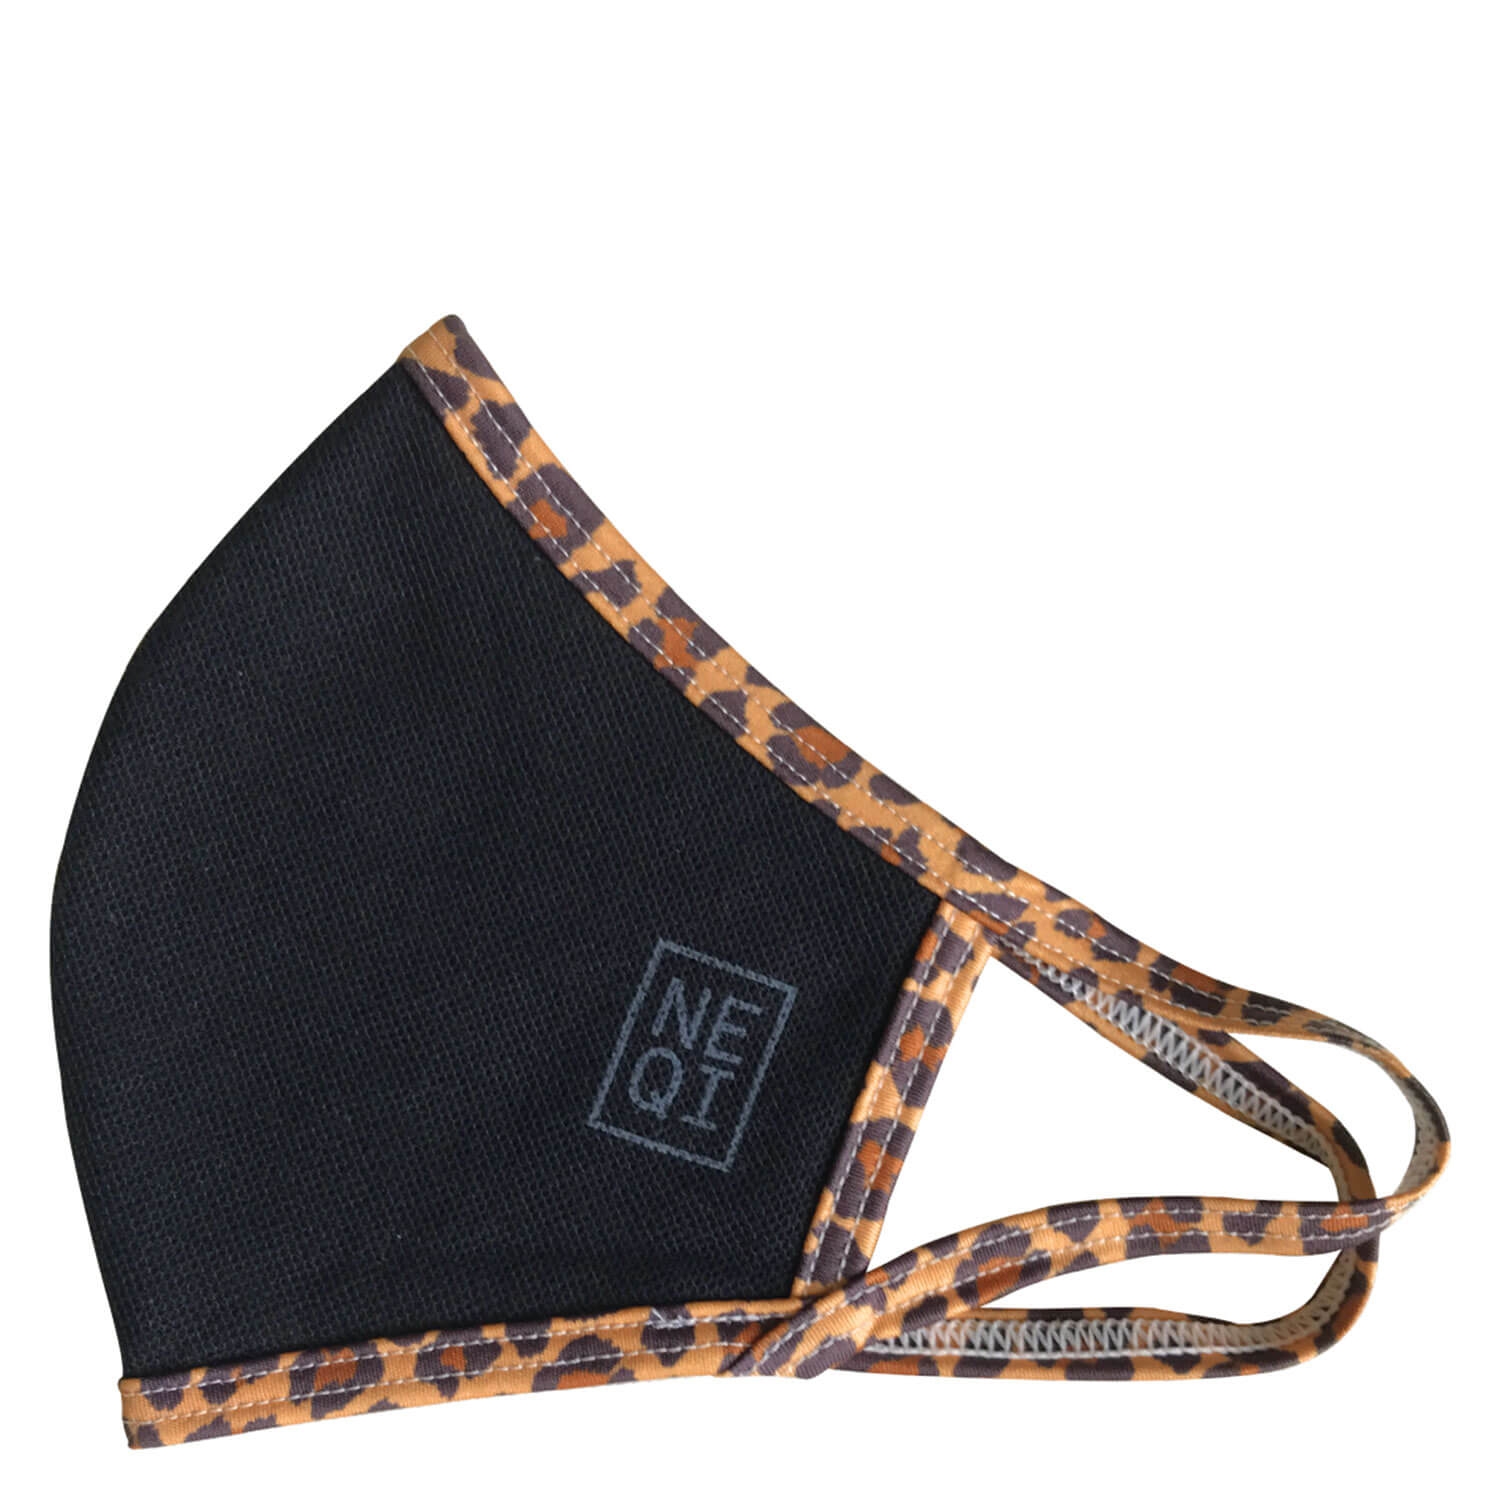 Product image from NEQI - Community Face Coverings Leo